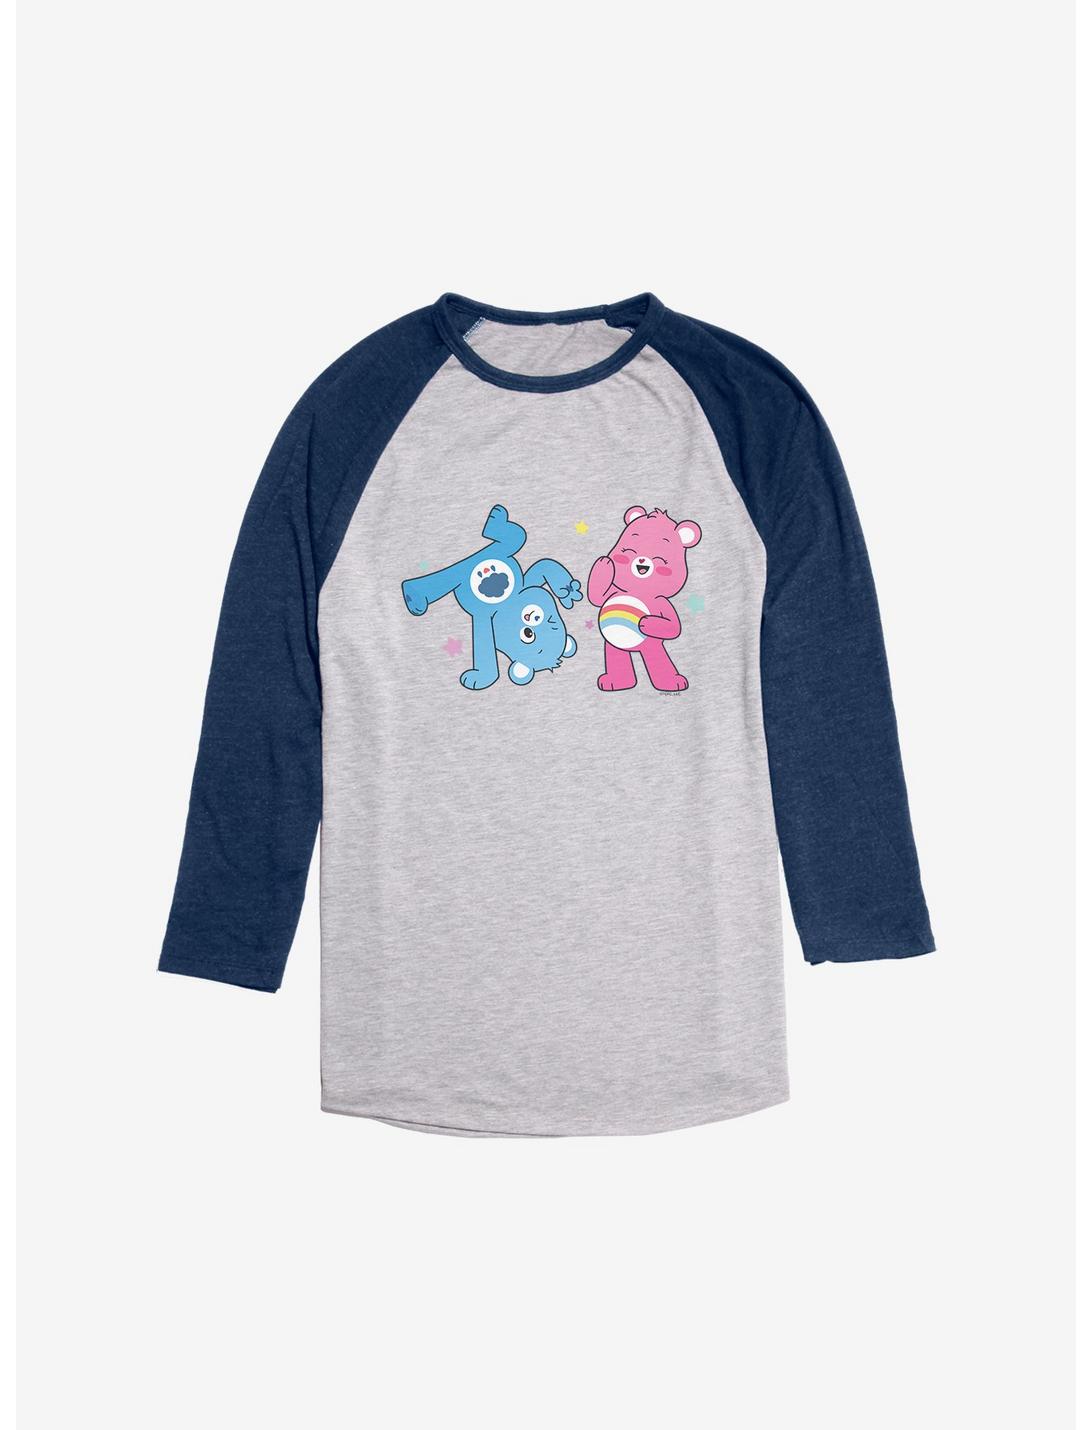 Care Bears Cheer and Grumpy Goofing Around Raglan, Ath Heather With Navy, hi-res